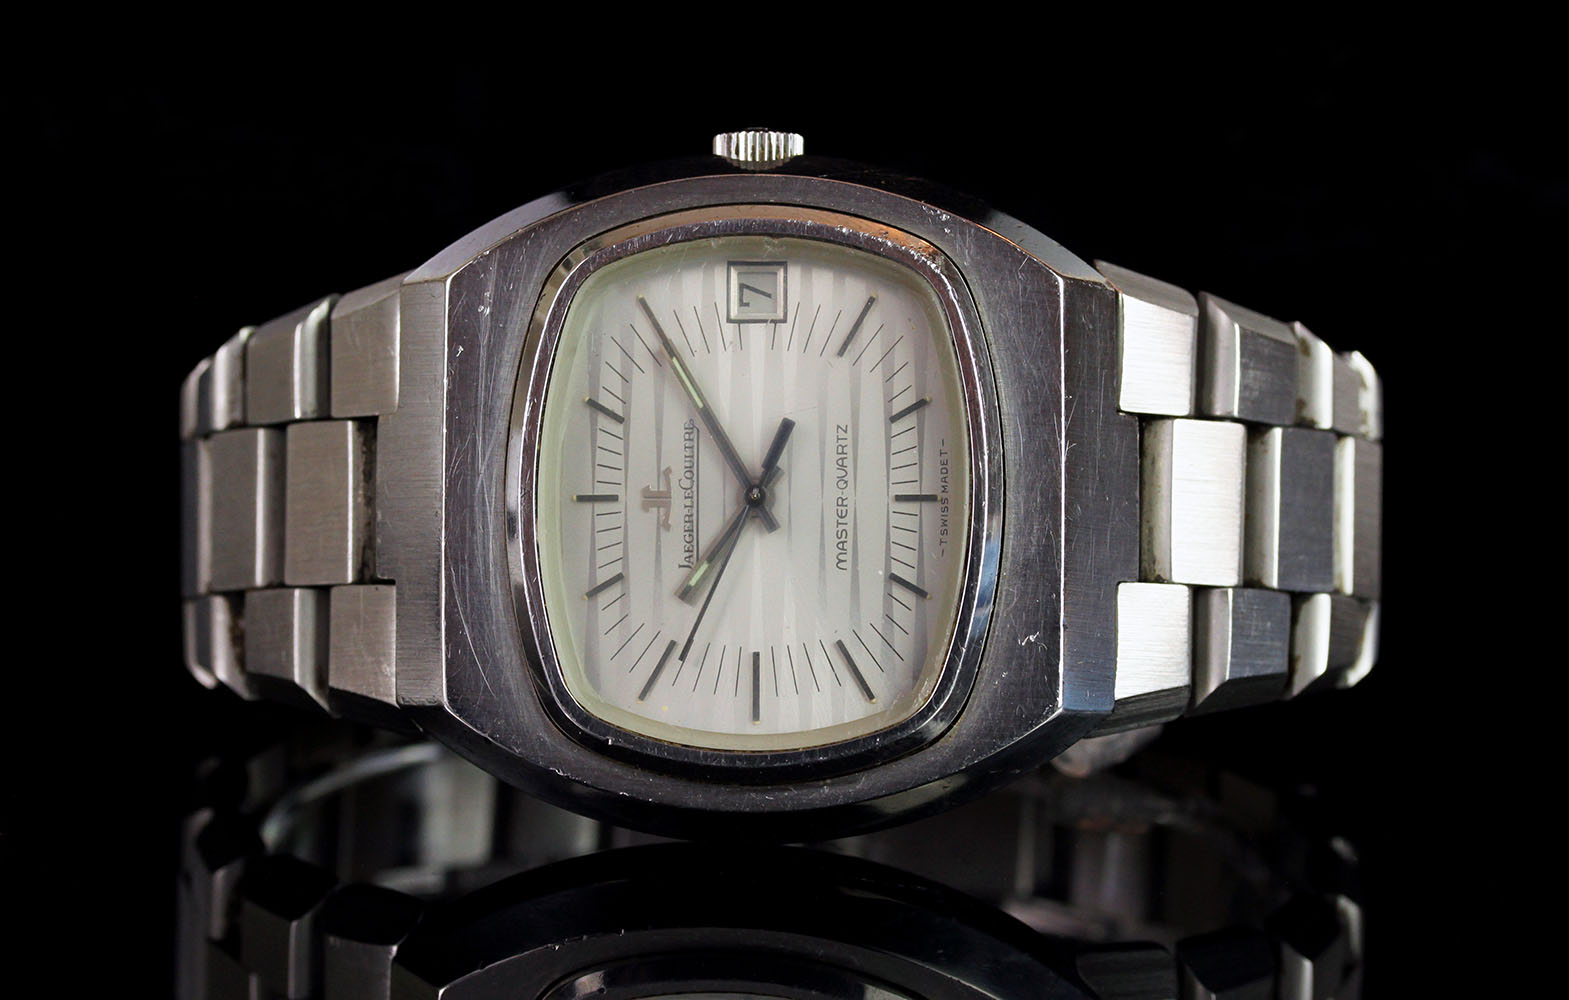 GENTLEMENS JAEGER LECOULTRE MASTER-QUARTZ WRISTWATCH, silver two tone dial with stick hour markers